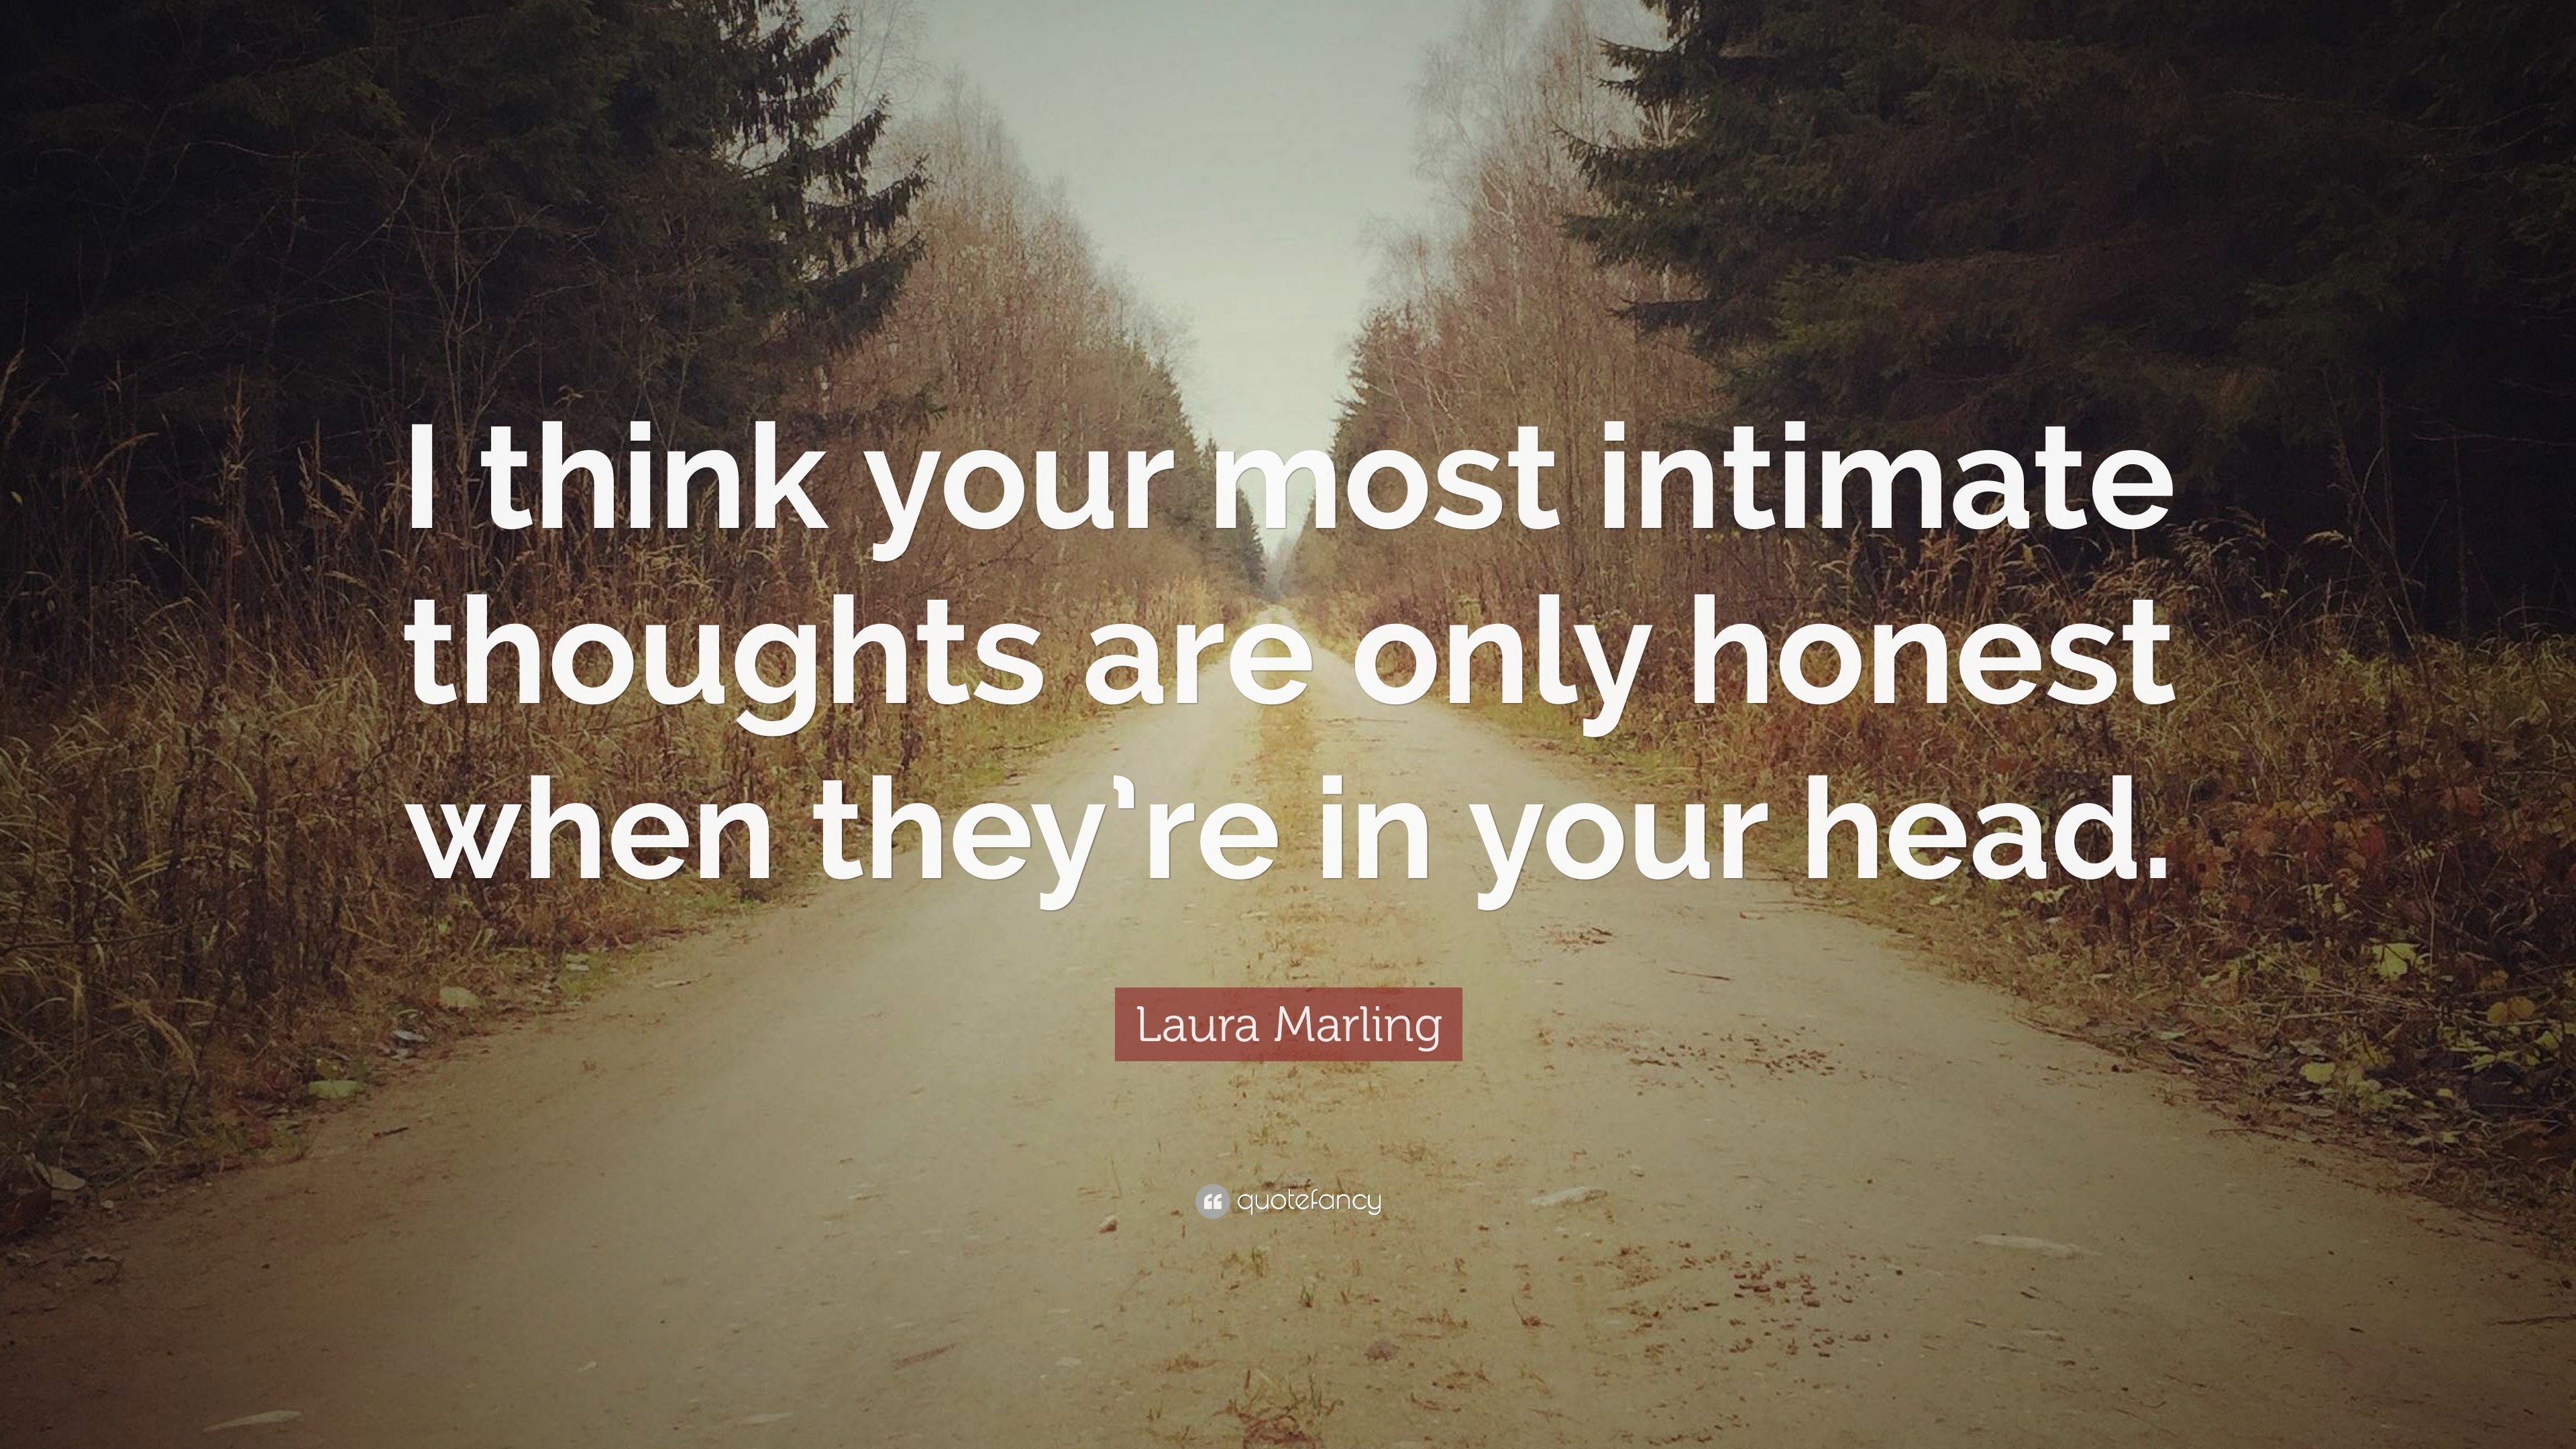 Laura Marling Quote “i Think Your Most Intimate Thoughts Are Only